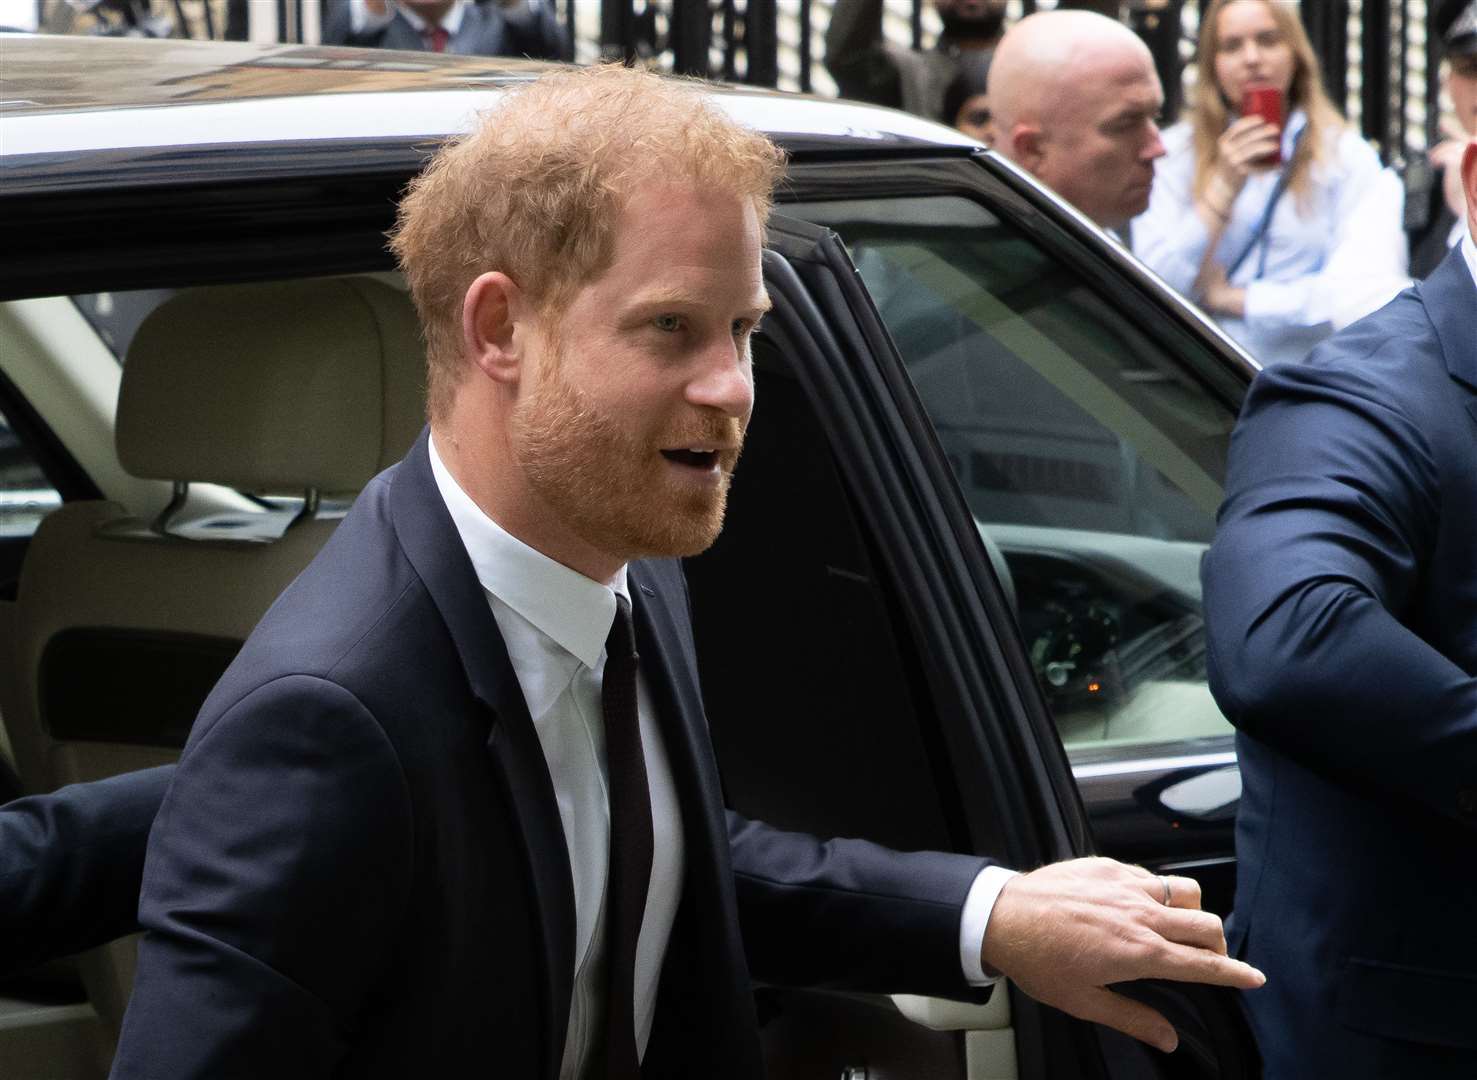 The Duke of Sussex at the Rolls Buildings in central London for the phone hacking trial against Mirror Group Newspapers (MGN) (Jeff Moore/PA)